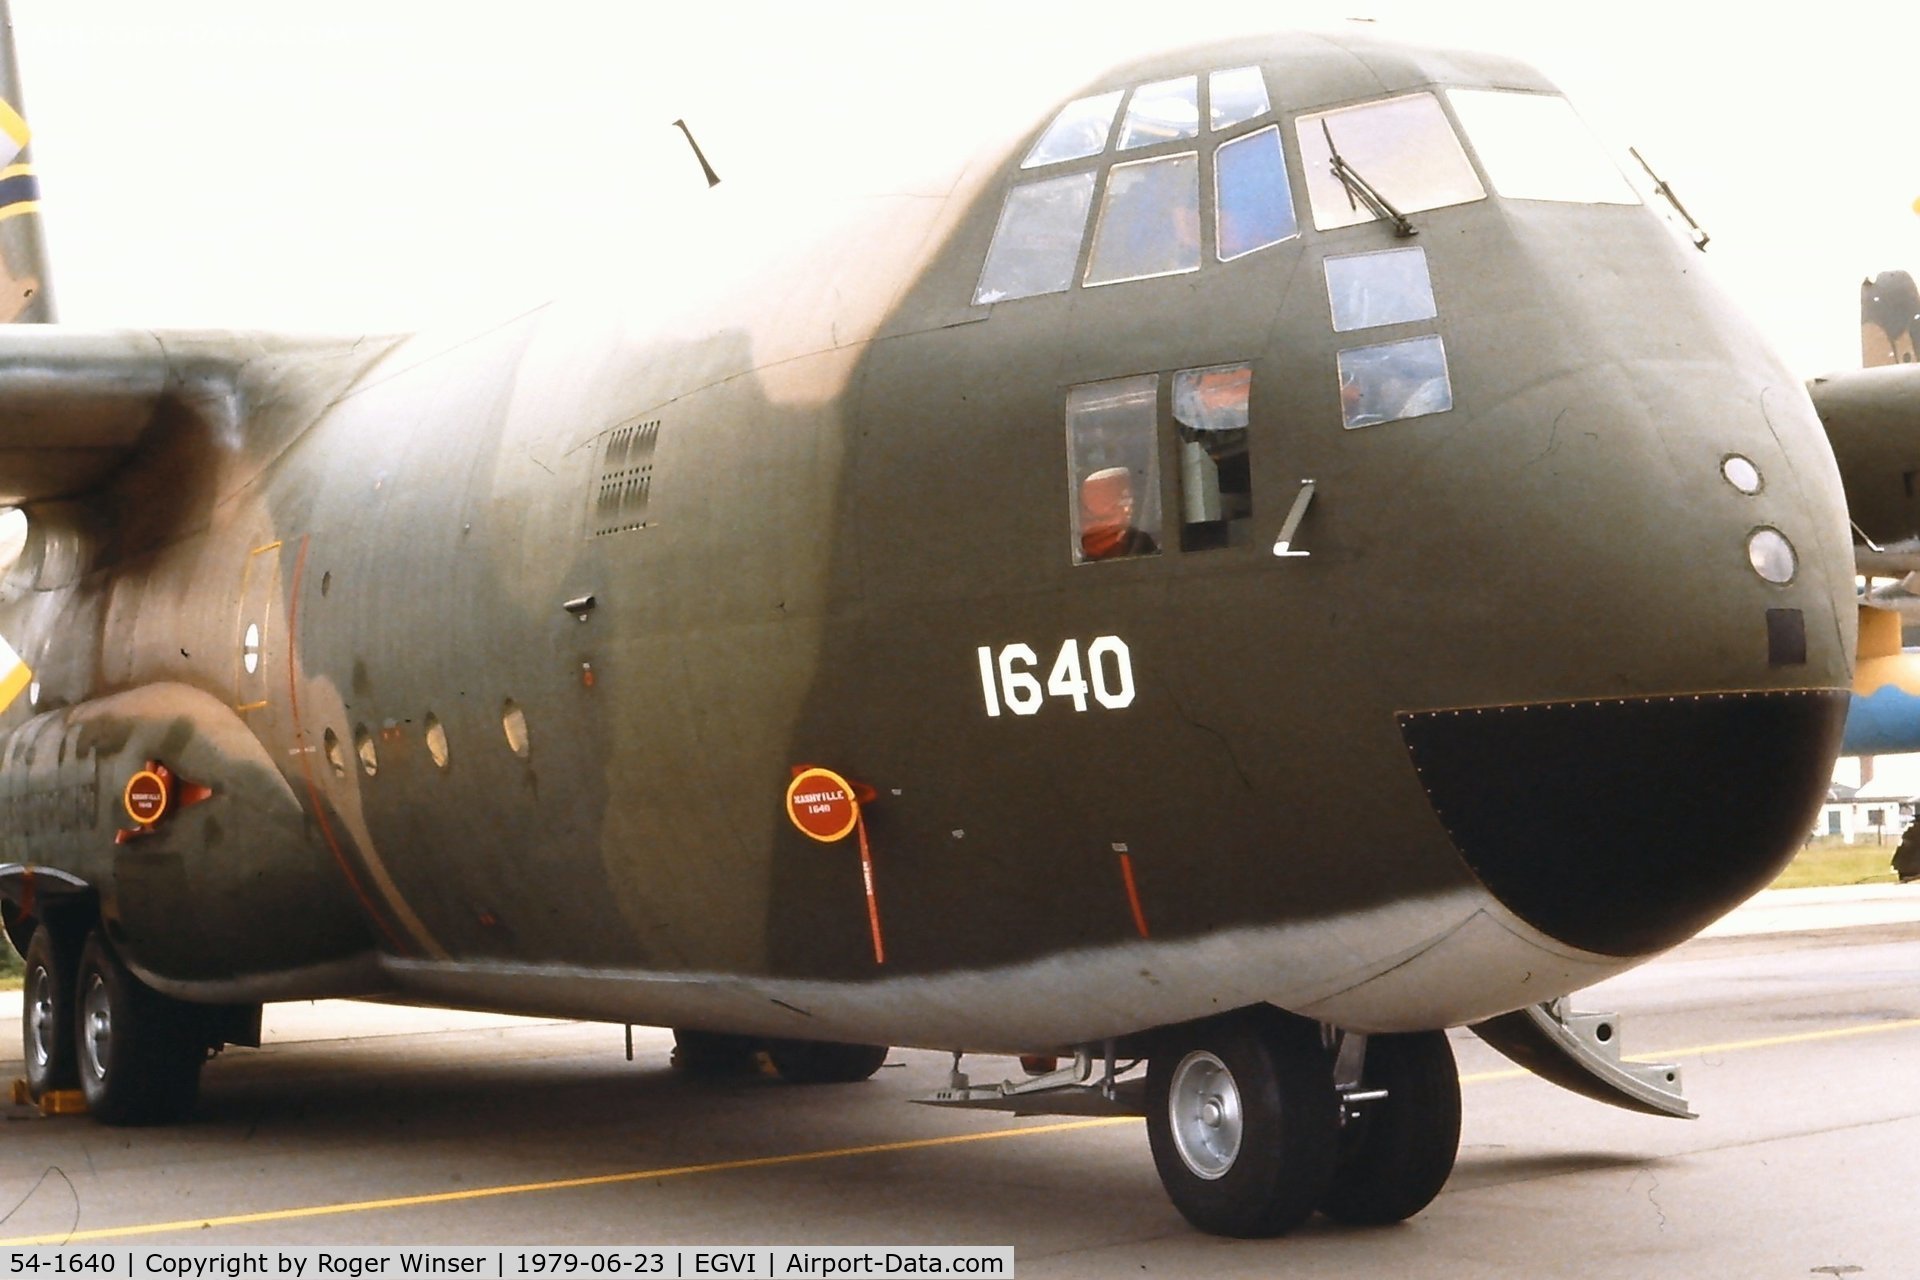 54-1640, 1954 Lockheed C-130A Hercules C/N 182-3027, An early build Hercules attending the IAT held at RAF Greenham Common in 1979. The air show celebrated the 25th anniversary of the Lookheed C-130. Operated by the 105th TAS of the Tennessee ANG. C-130's still going strong over 58 years on. 